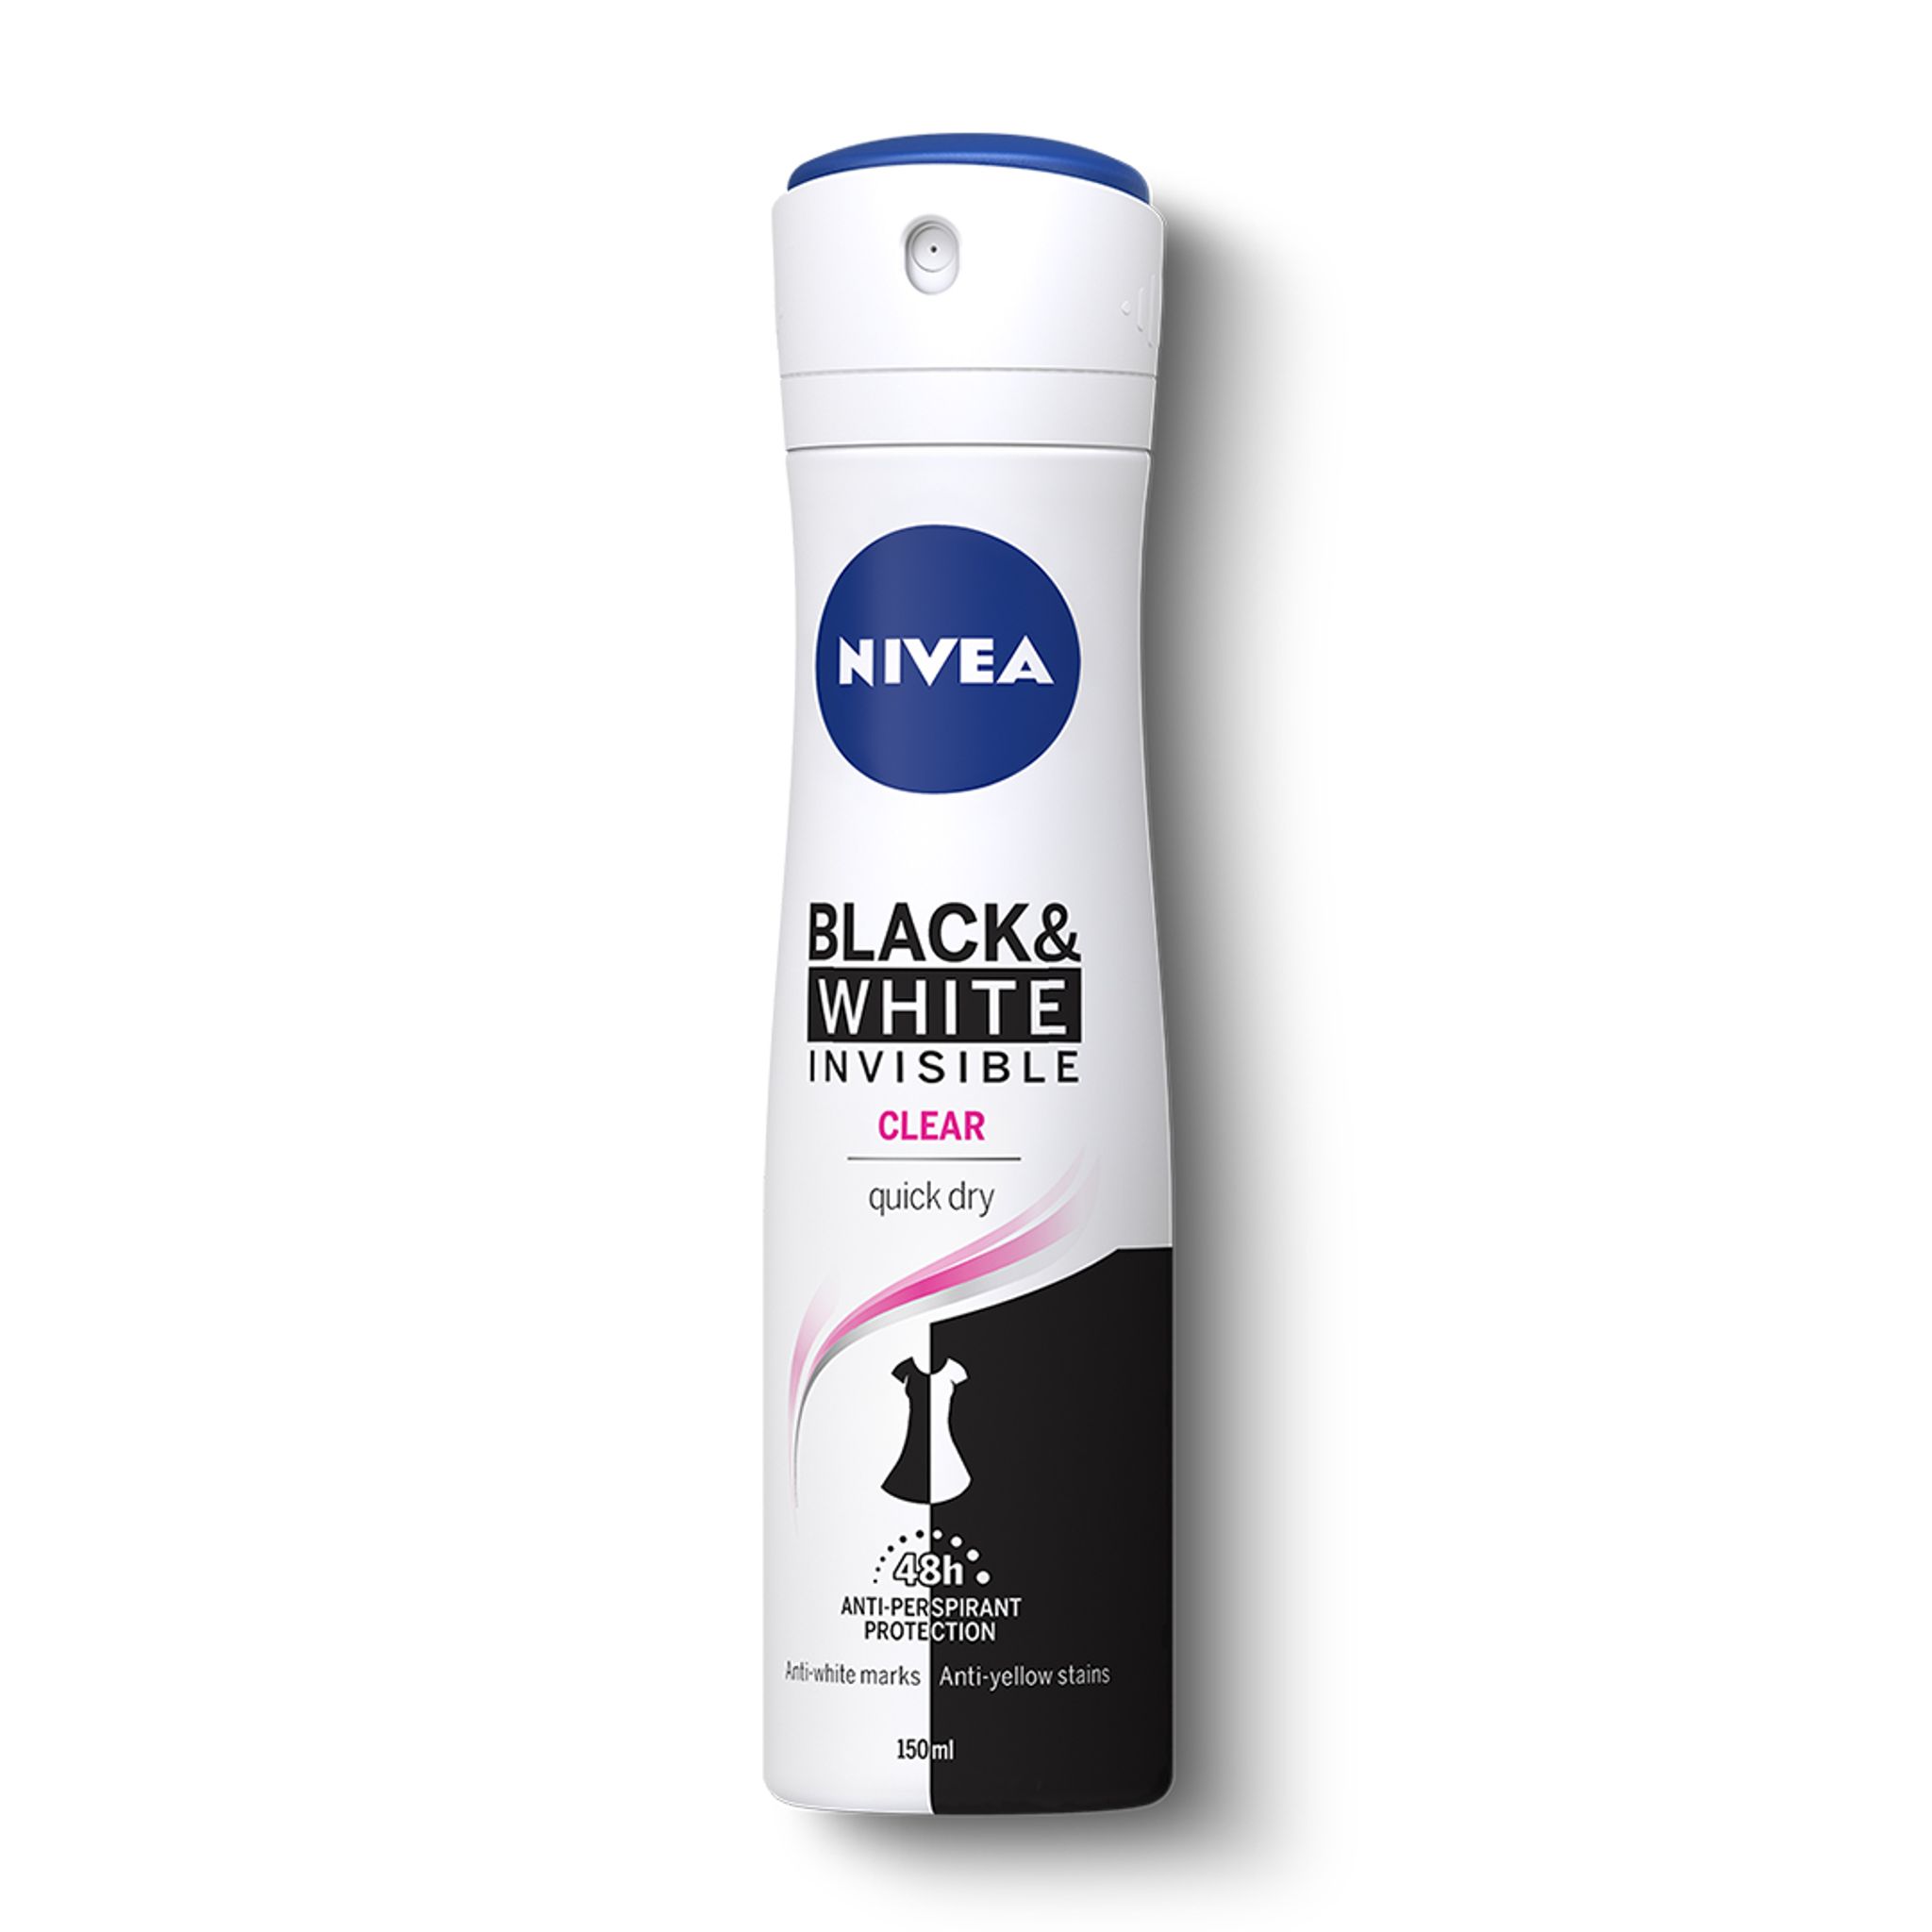 Hedendaags Egoïsme Houden Nivea Body Spray Black & White Invisible Clear 150ml - 1Sell